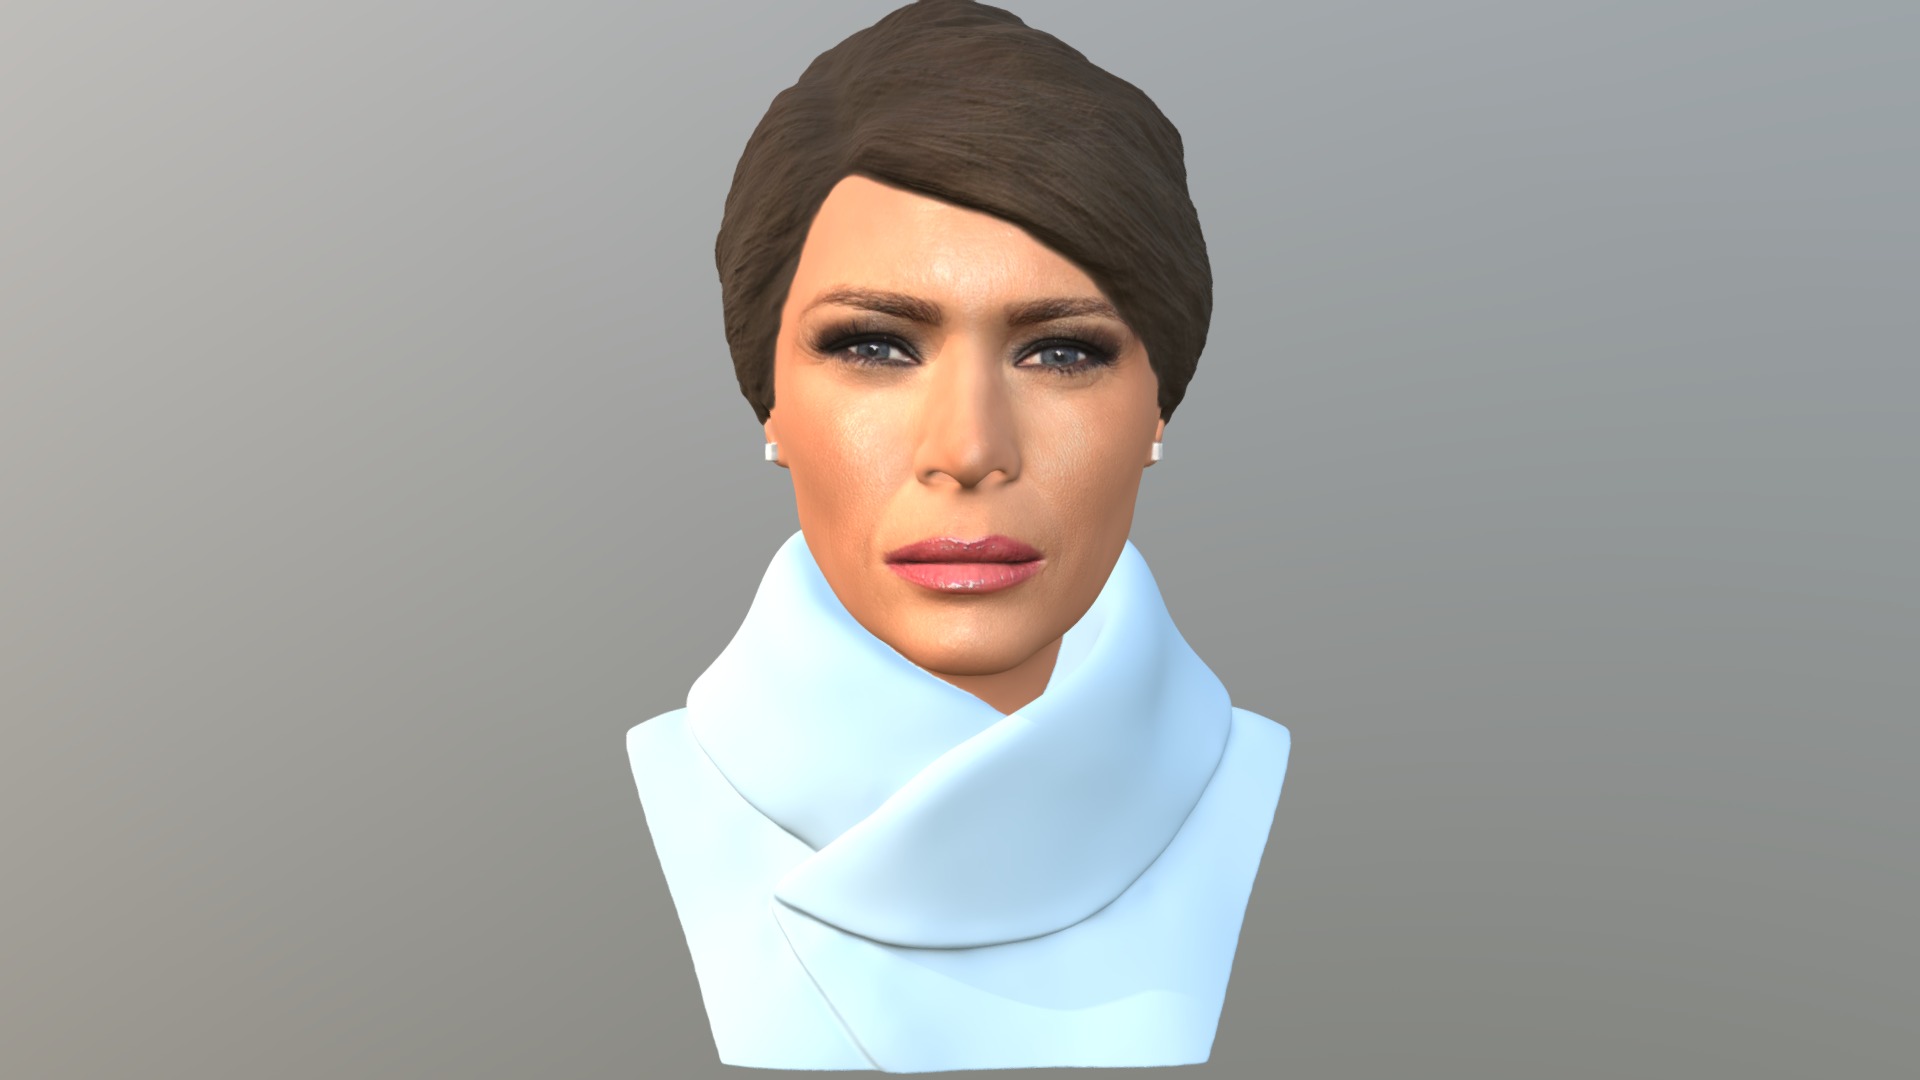 3D model Melania Trump bust for full color 3D printing - This is a 3D model of the Melania Trump bust for full color 3D printing. The 3D model is about a person with a blue shirt.